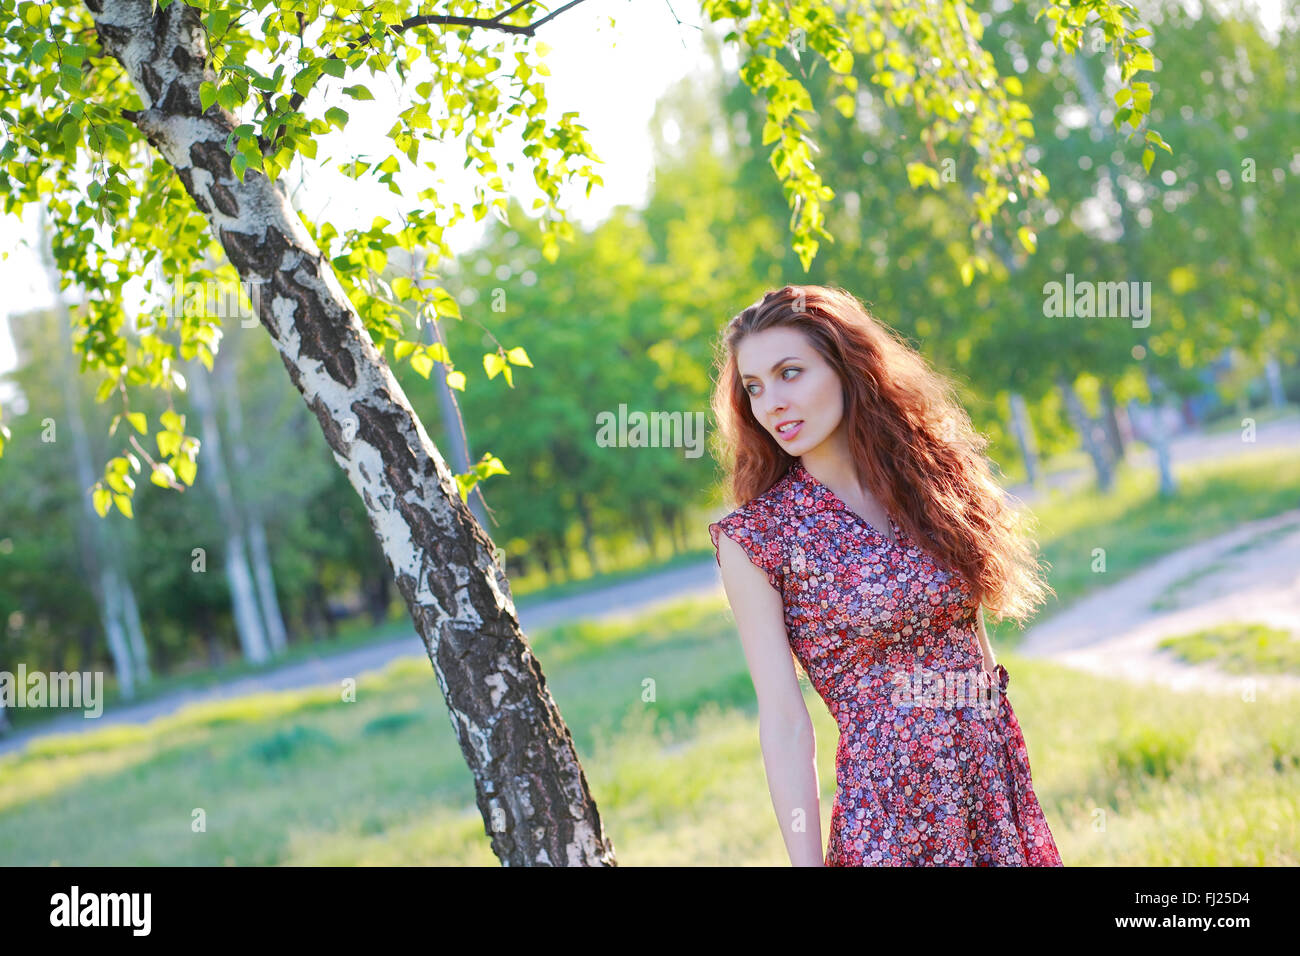 Beautiful red-haired girl in dress posing in nature Stock Photo